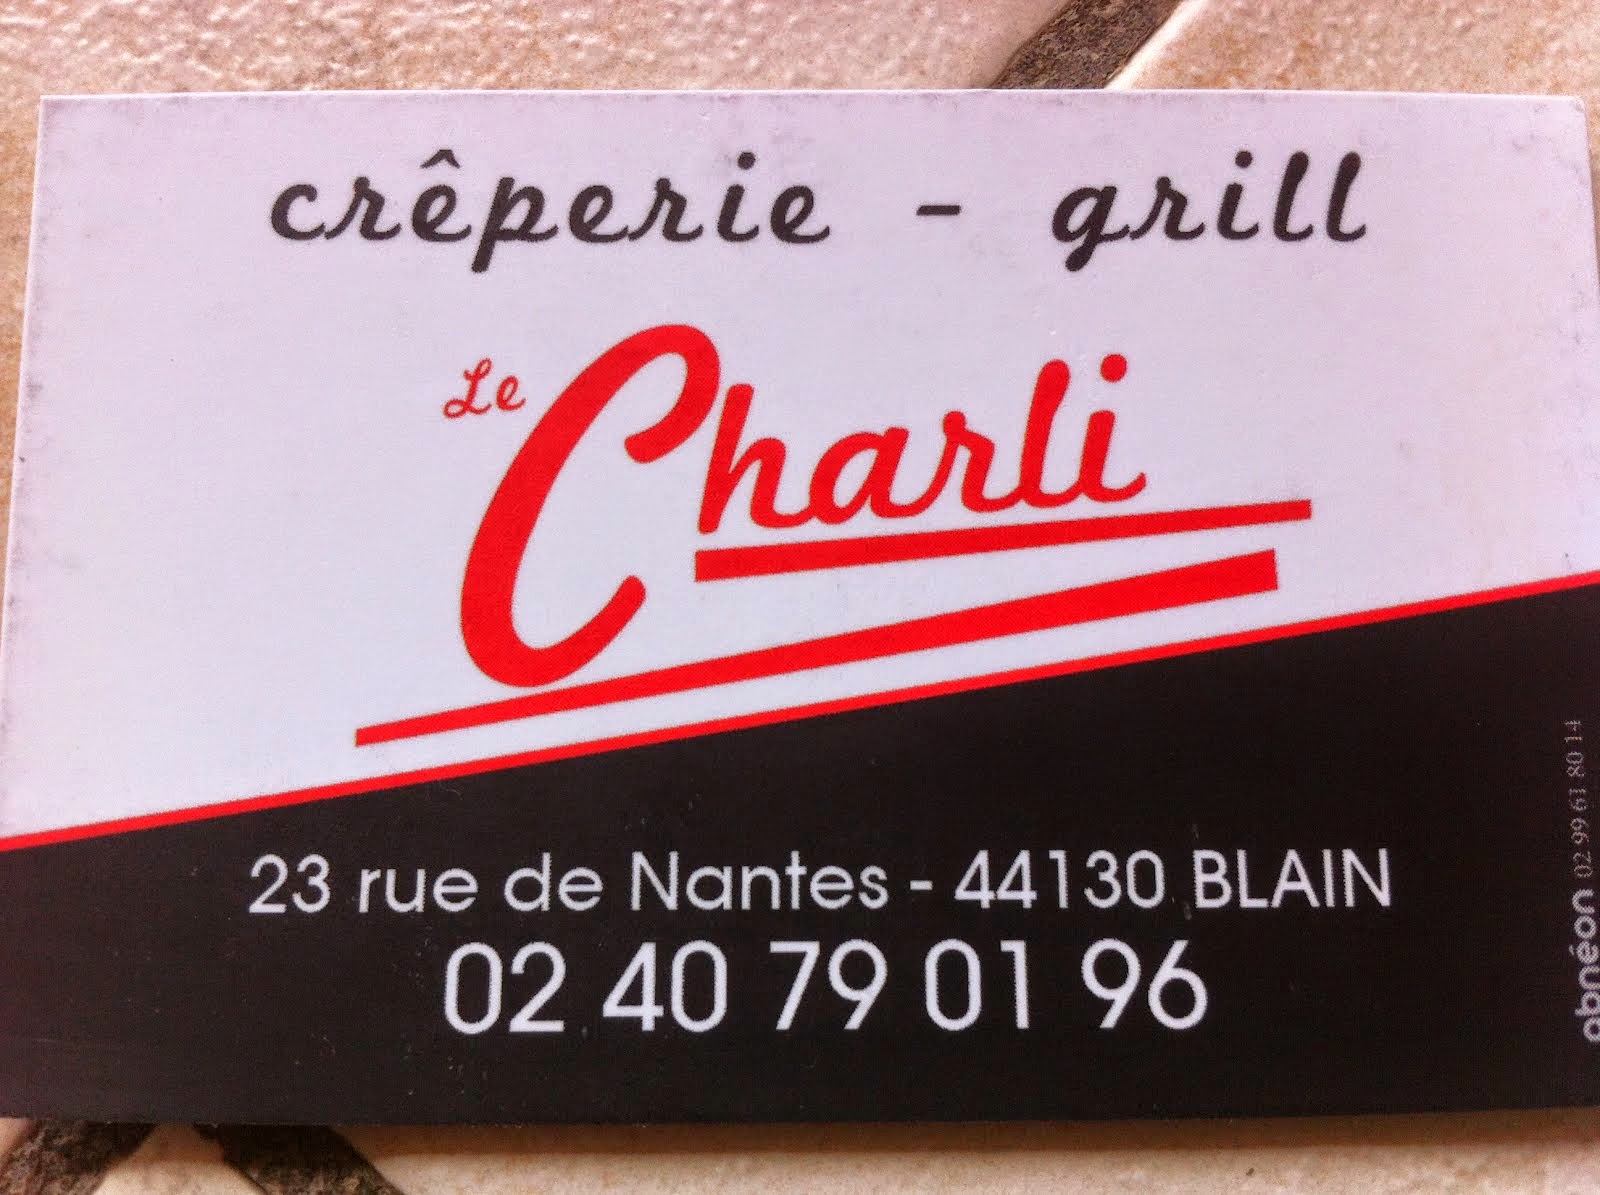 Le CHARLI Créperie-Grill